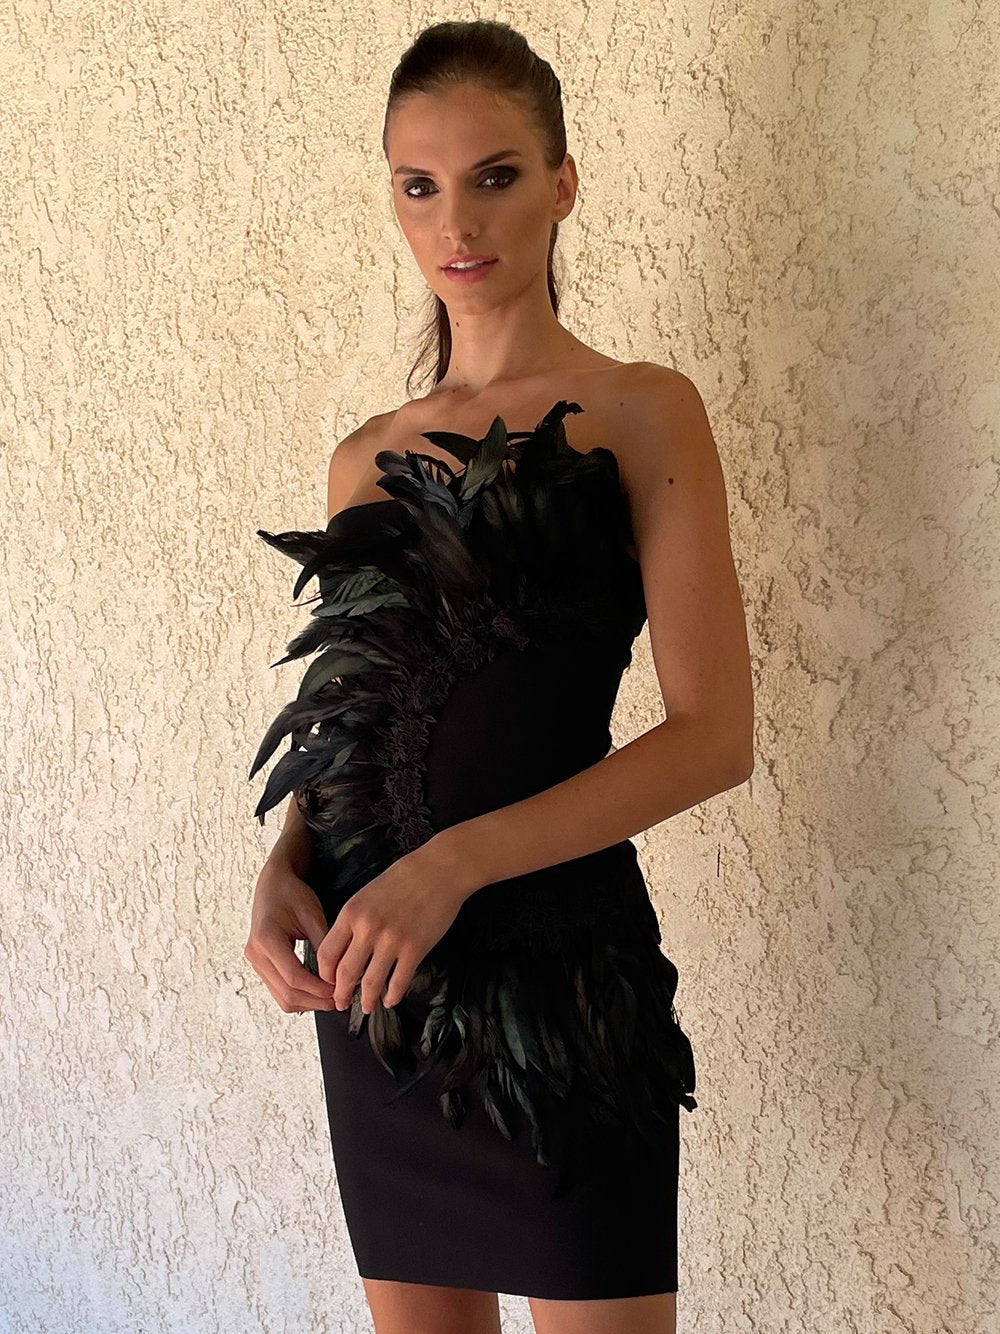 HESTER Feathers Dress